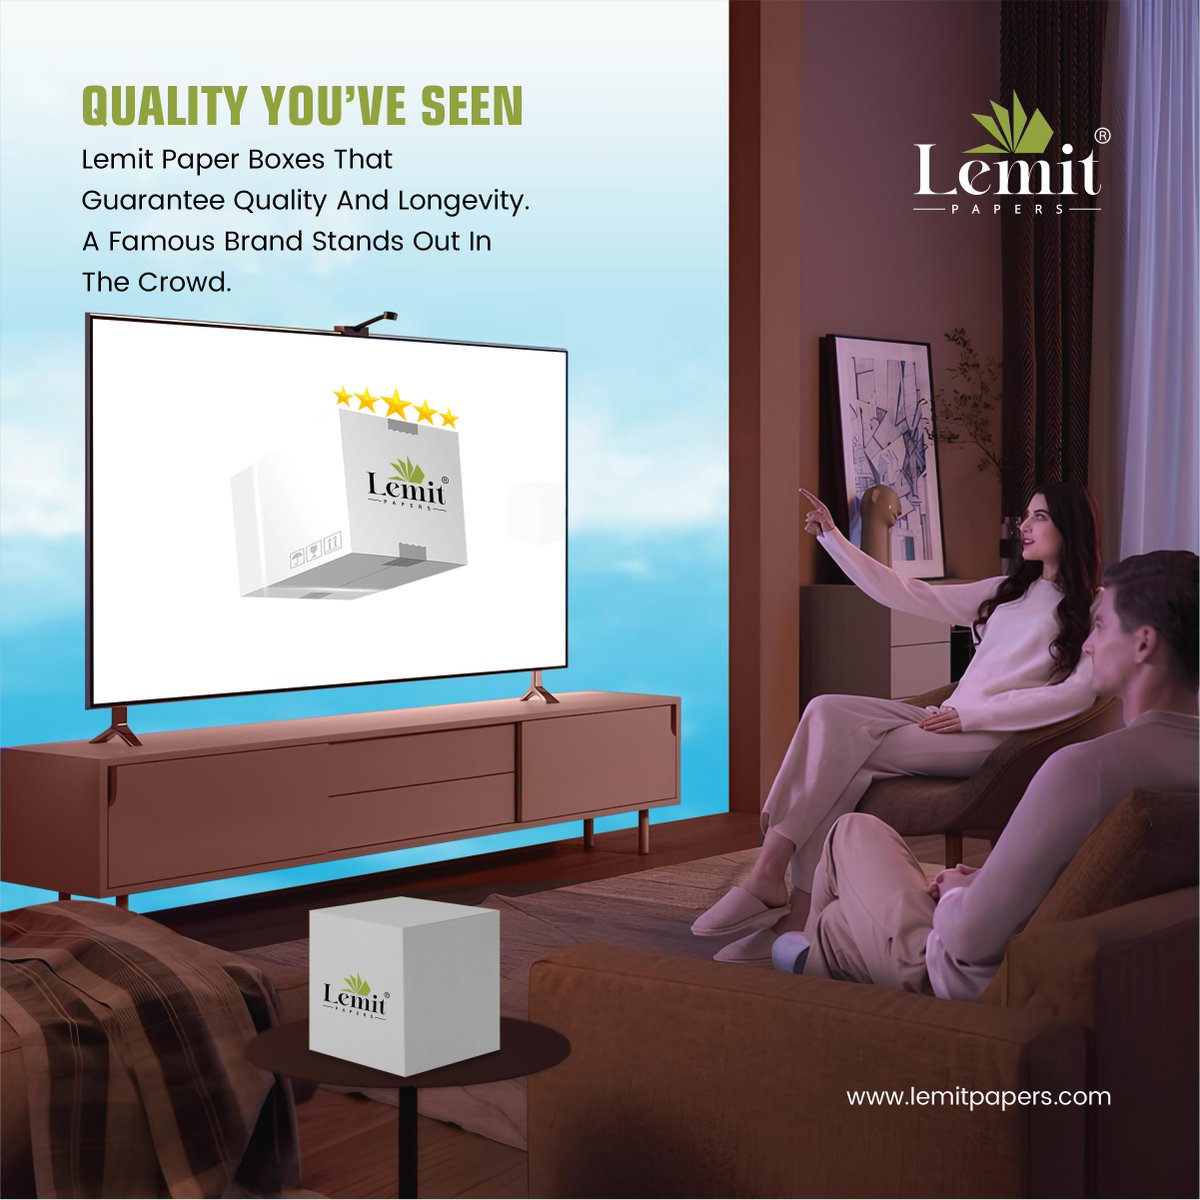 Lemit Paper's boxes provide durability and quality.
.
For More Info visit website:
lemitpapers.com
.
#packagingindustry #papercompany #packaging #paperindustry #papermaking #papermanufacturer #duplexboard #paperboard #innovation #foodpackaging #design #LemitPapers